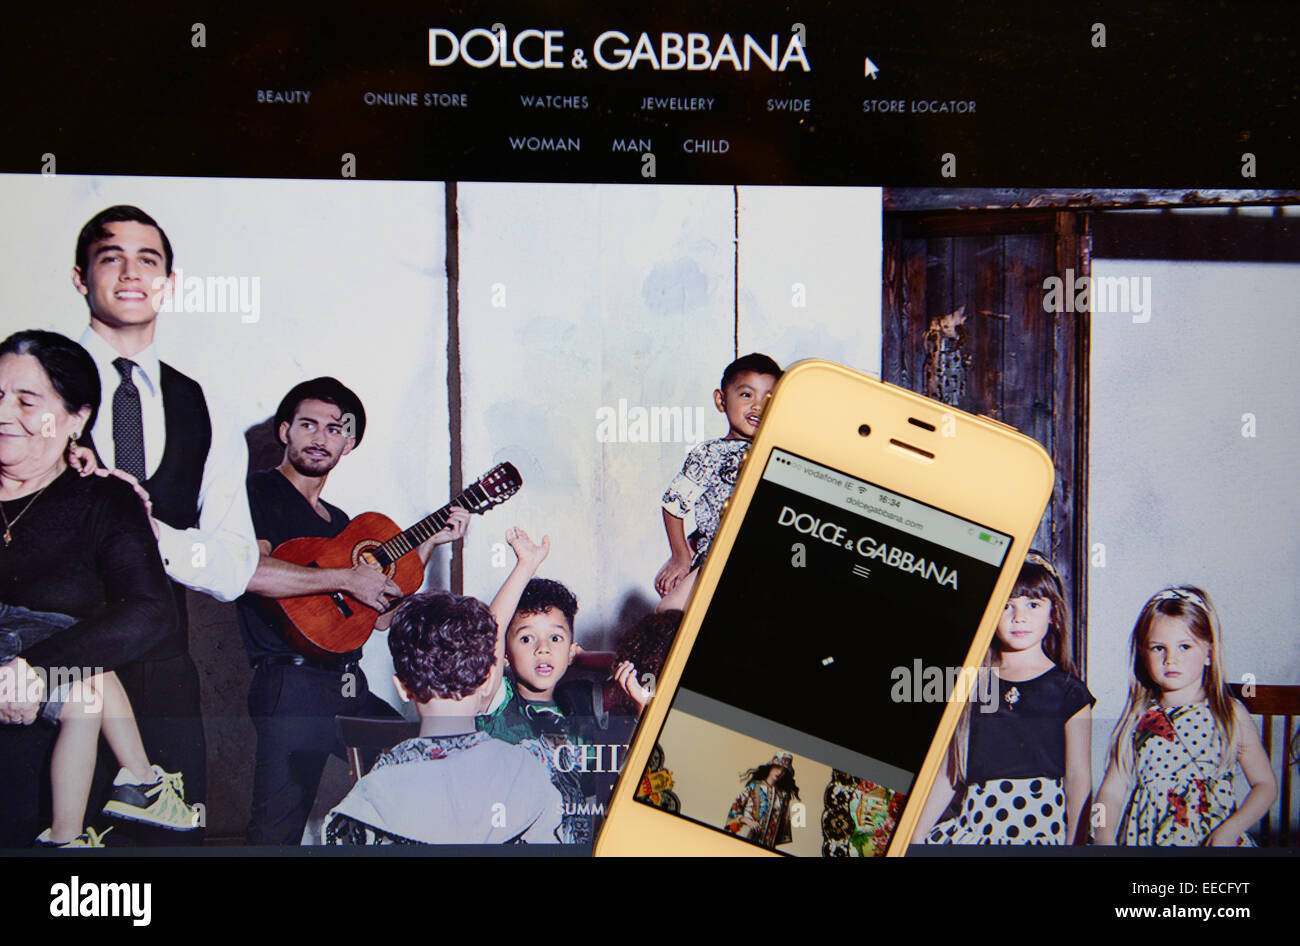 Dolce and Gabbana Website and IPhone Stock Photo - Alamy